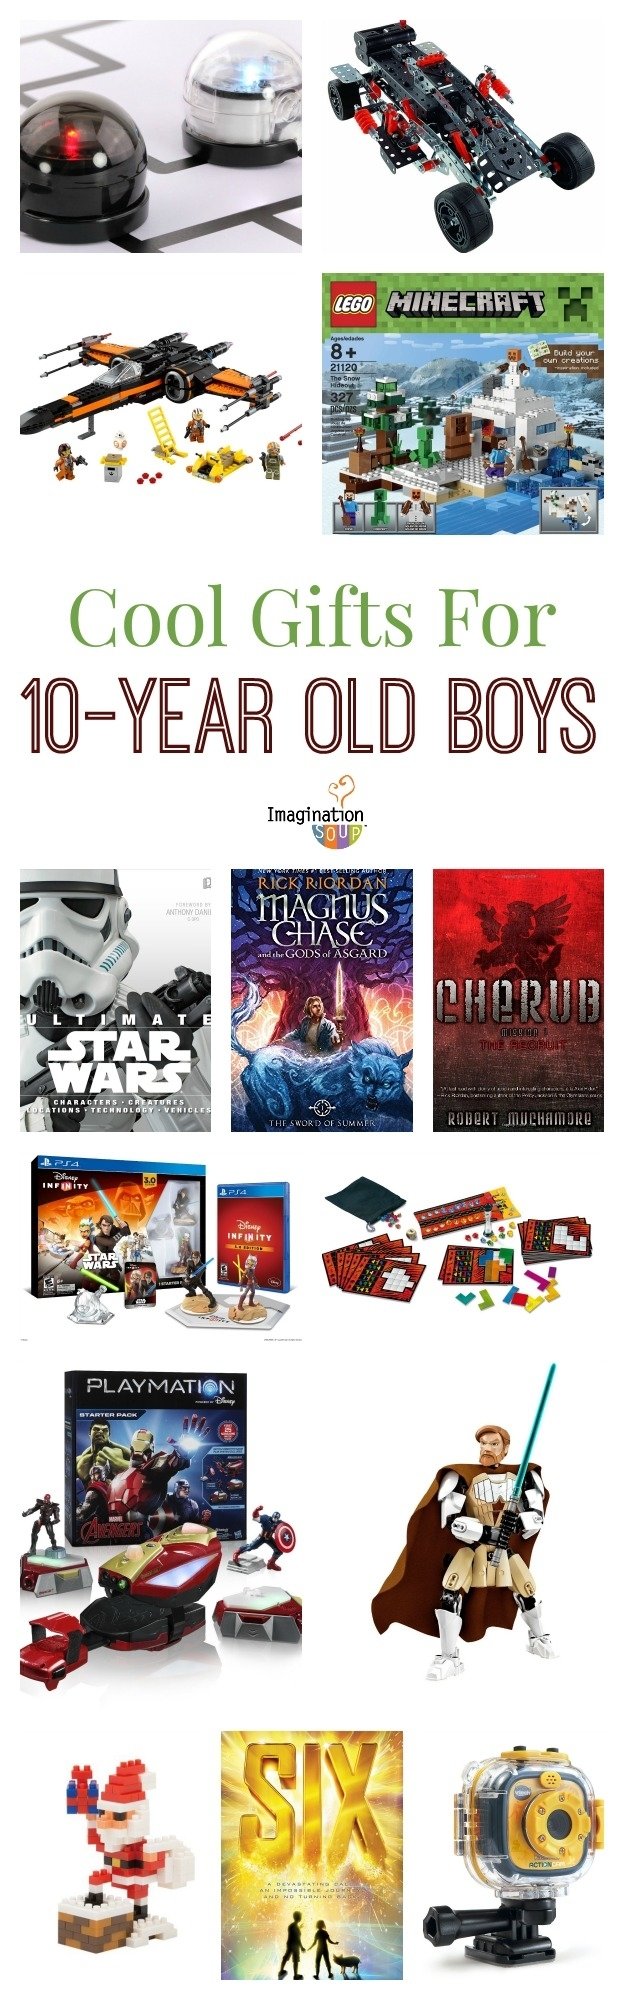 10 Pretty Gift Ideas 10 Year Old Boy gifts for 10 year old boys imagination soup 1 2022